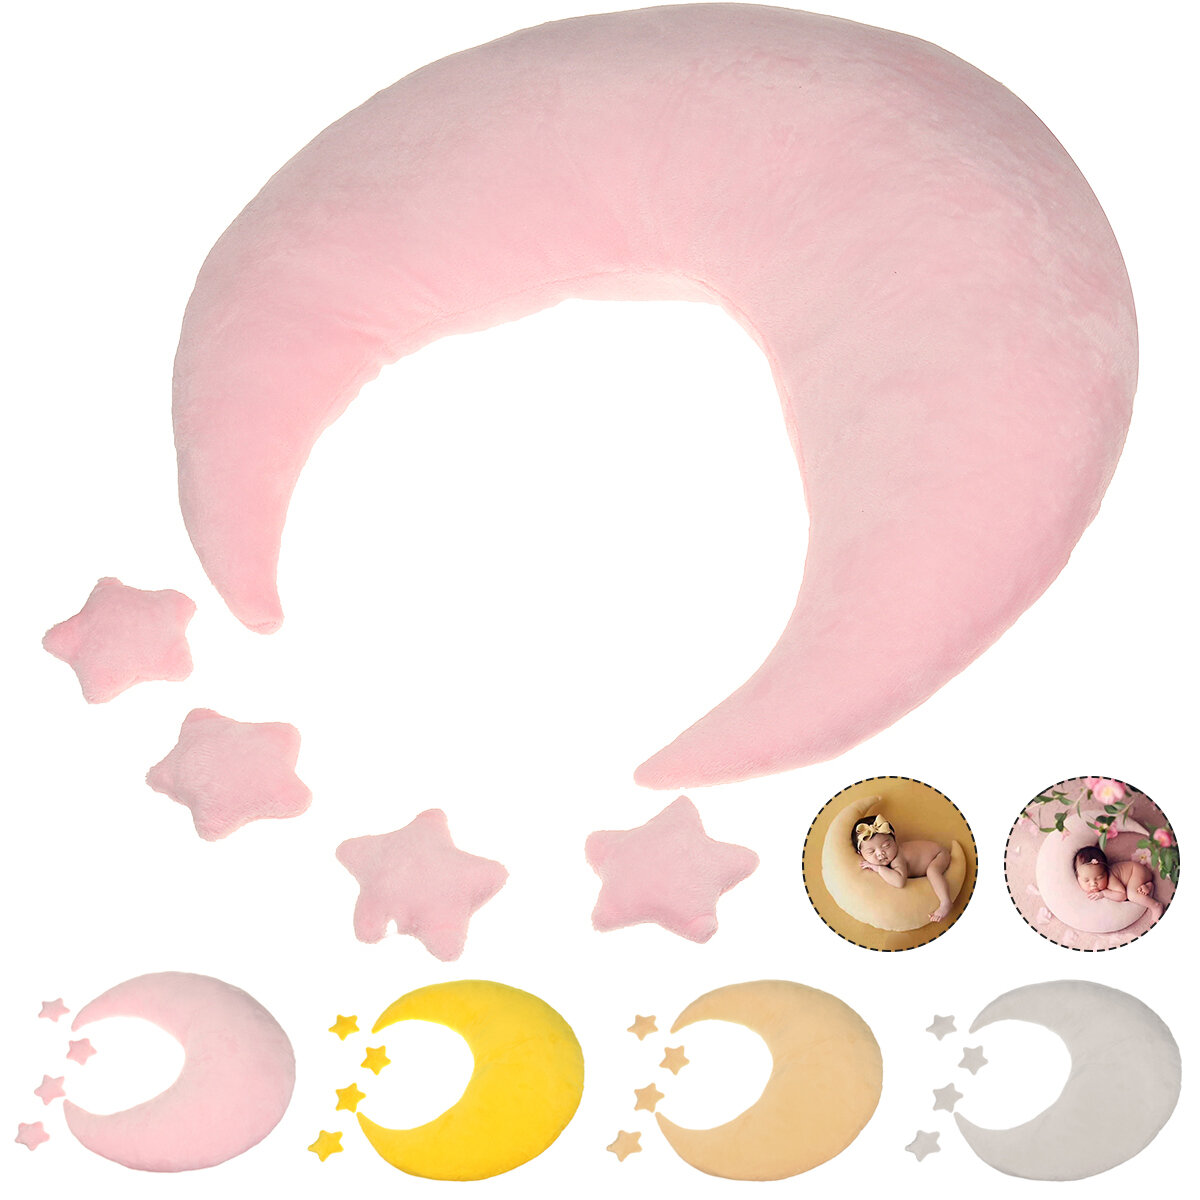 Newborn Baby Photography Props Moon Shaped Pillows Baby Photo Shoot Accessories with Stars Full-moon